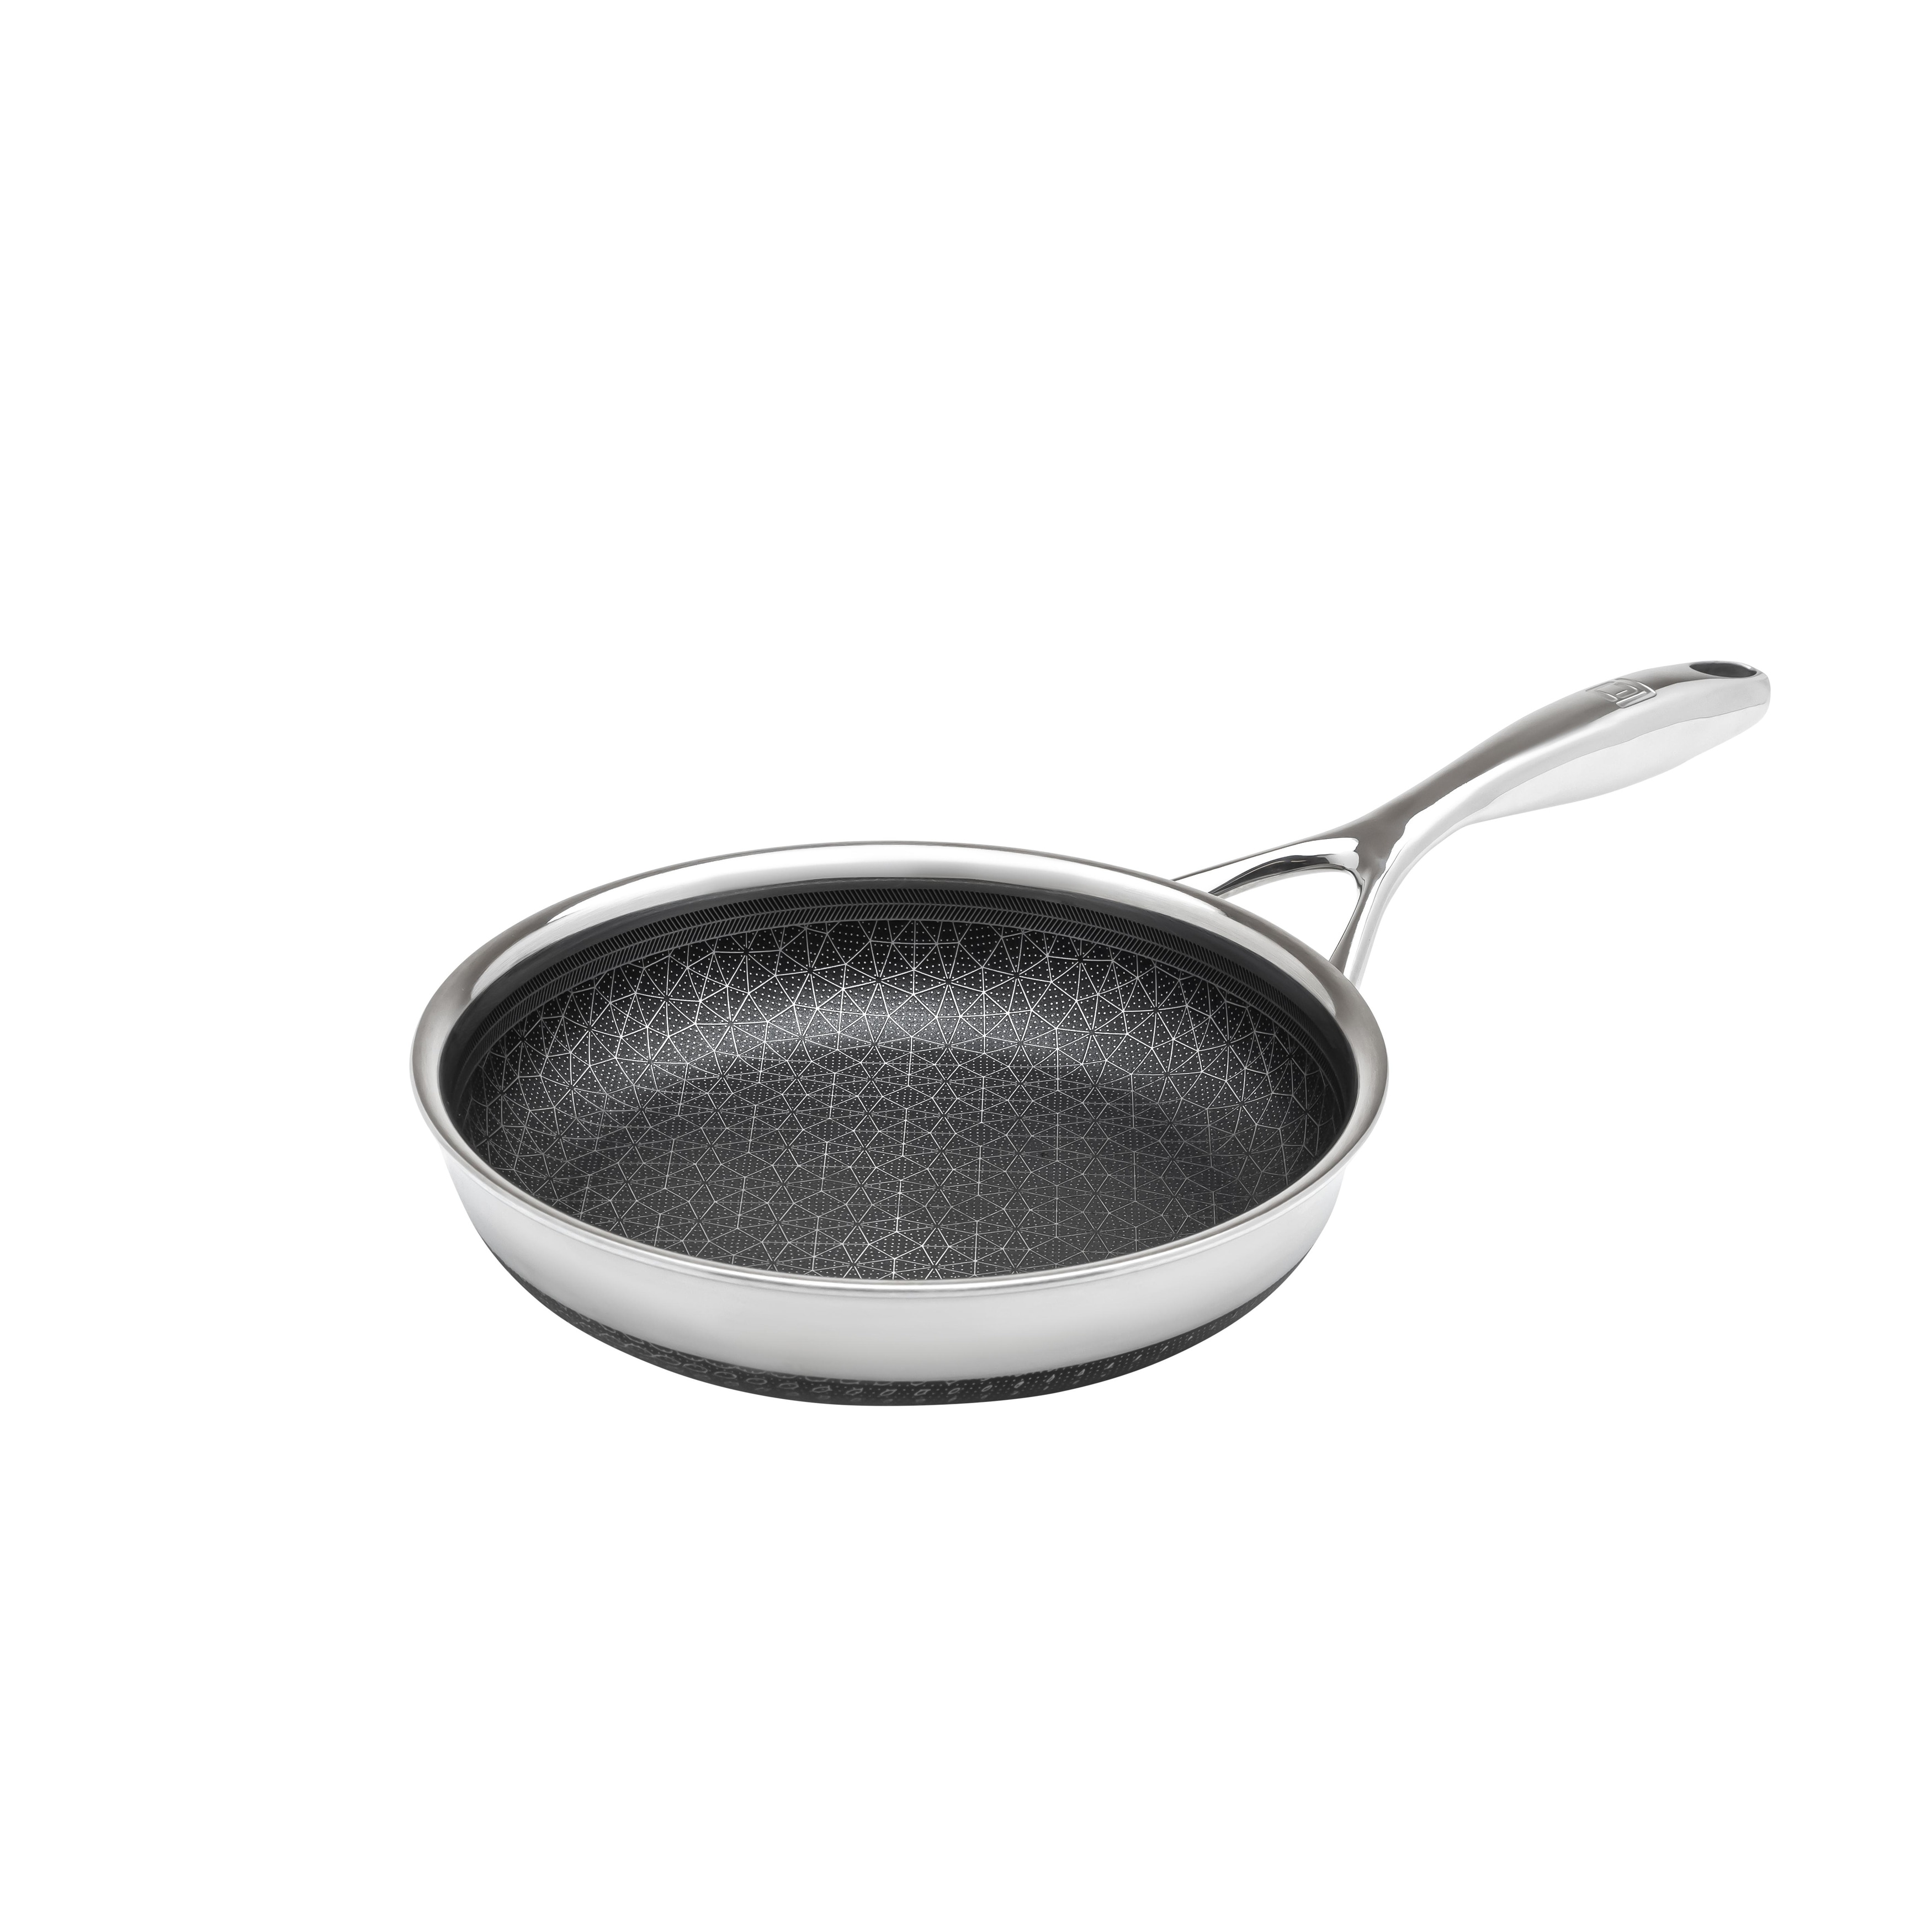 https://ak1.ostkcdn.com/images/products/is/images/direct/6911092c2907a46c9ad2ed0d724bca40a08f97dd/DiamondClad-by-Livwell-8%22-Hybrid-Nonstick-Frying-Pan.jpg